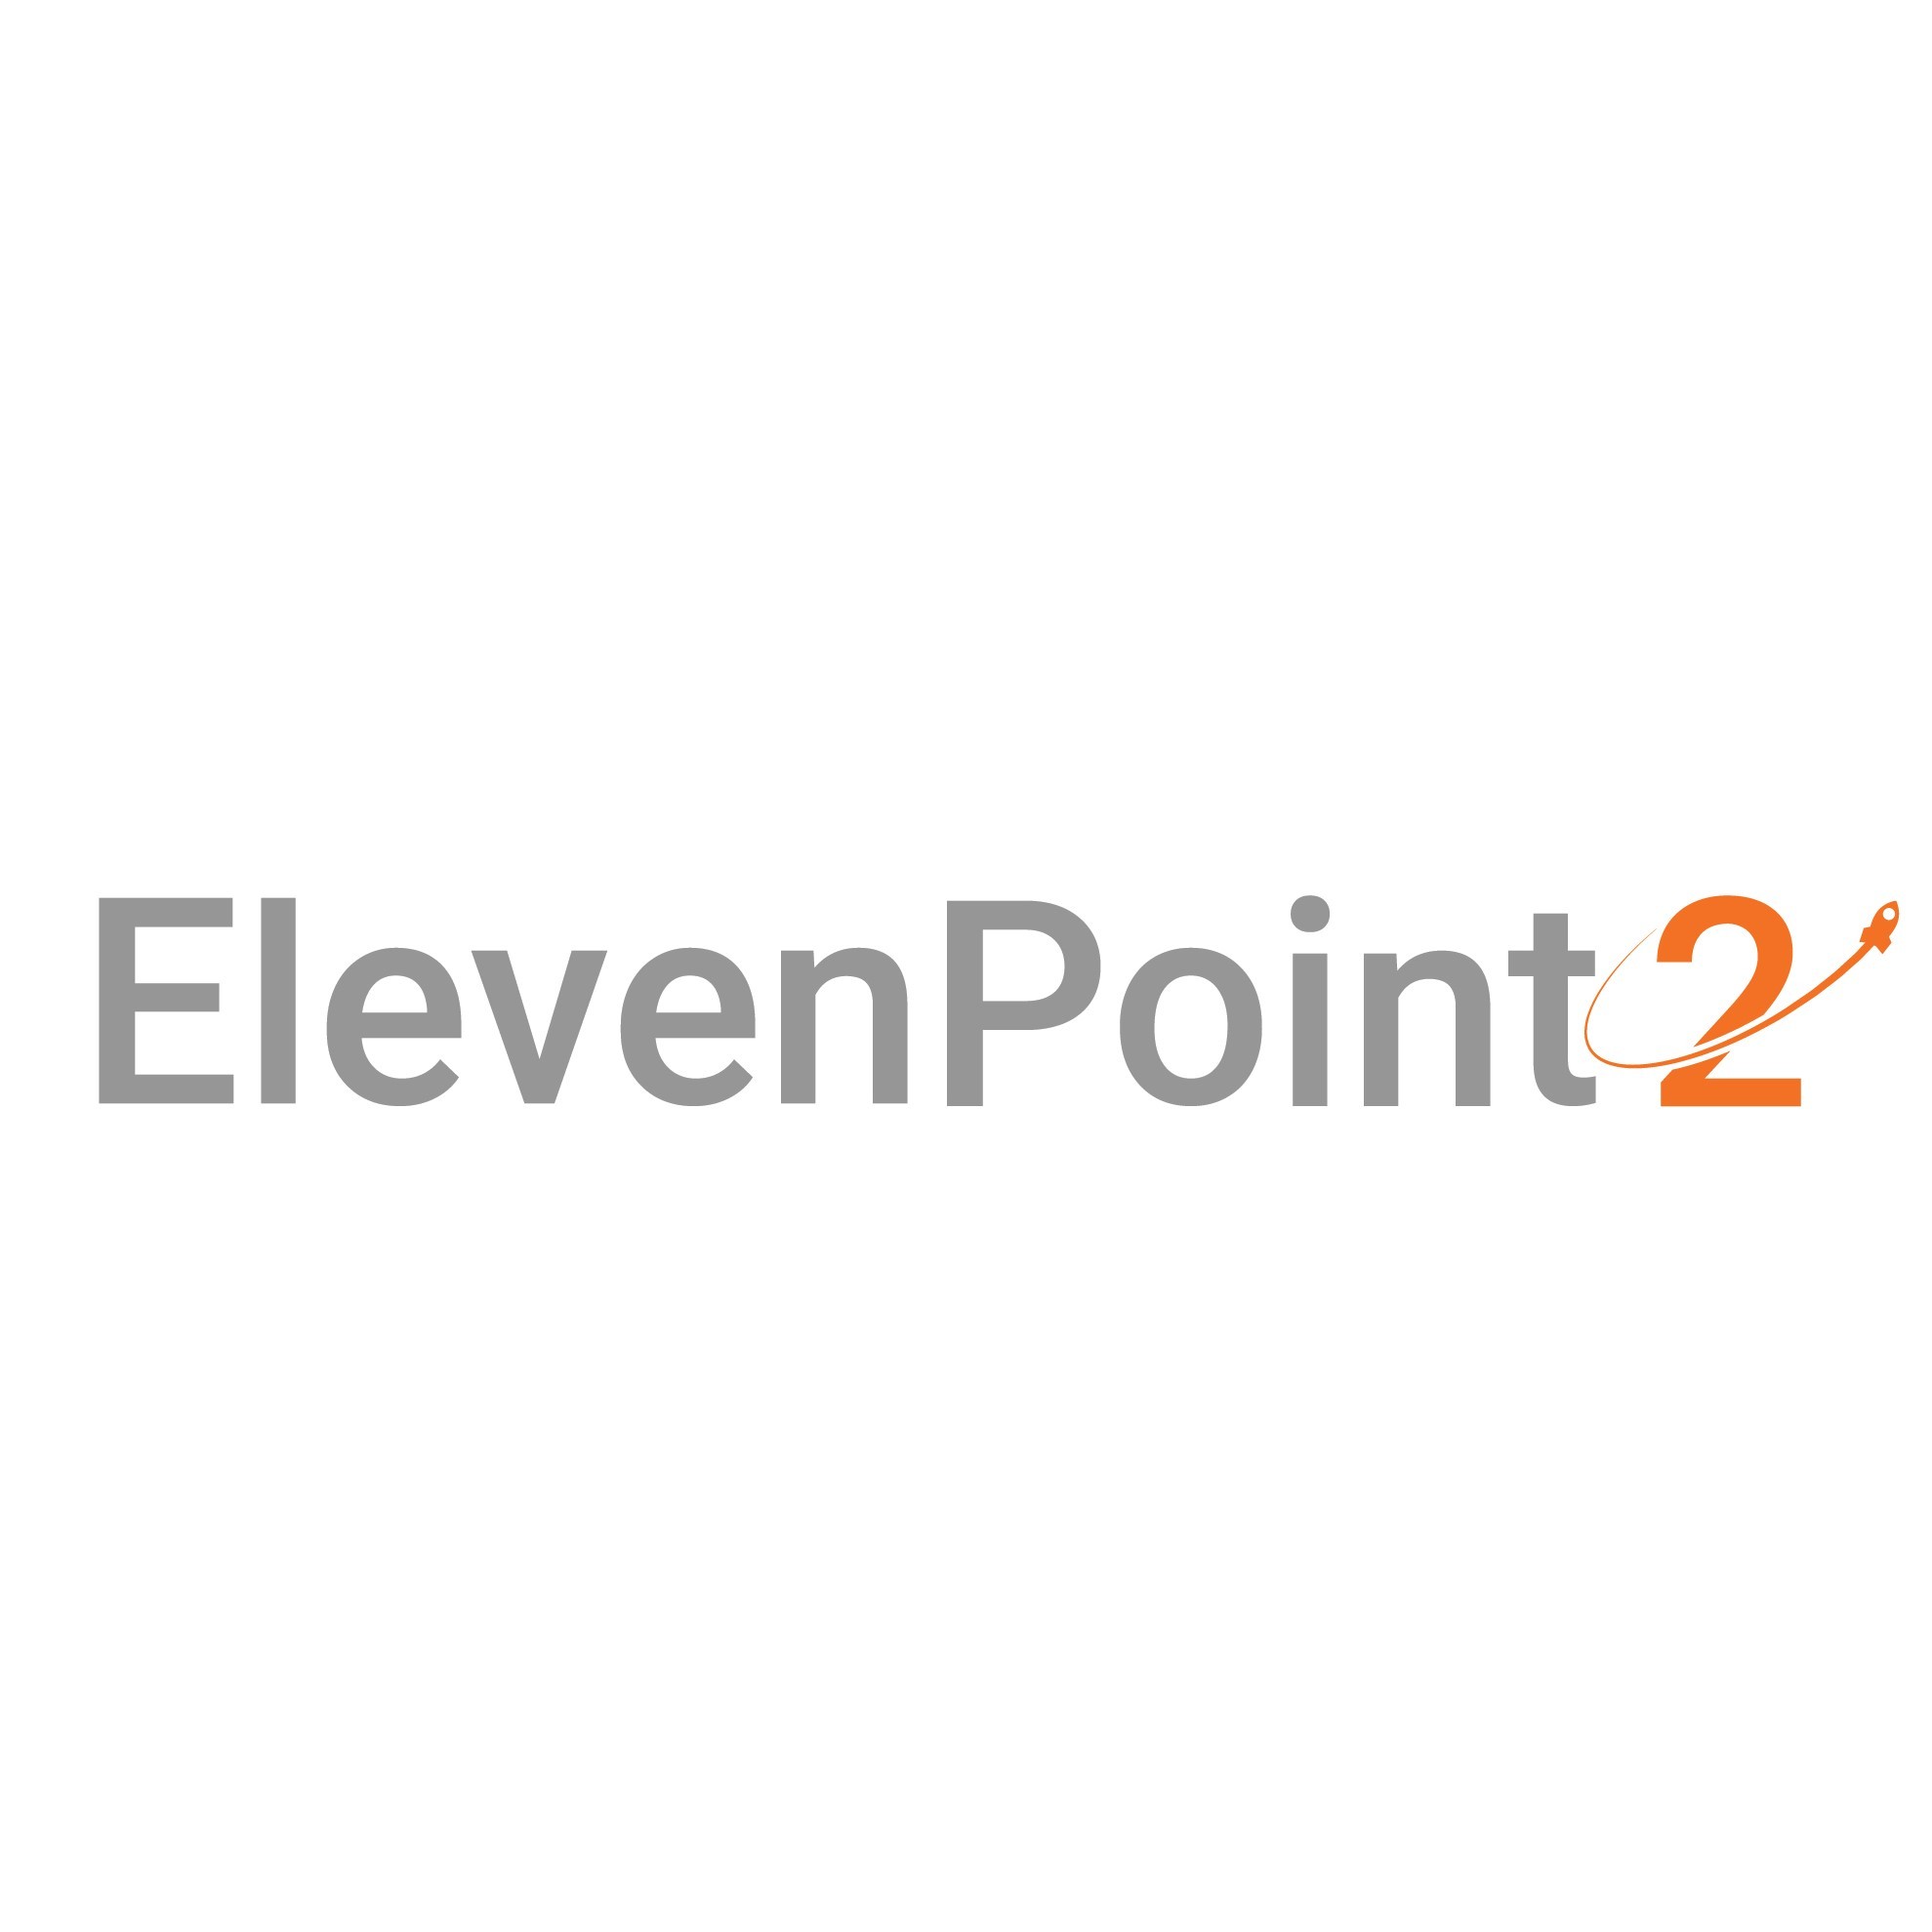 ElevenPoint2 Remote Game Jobs